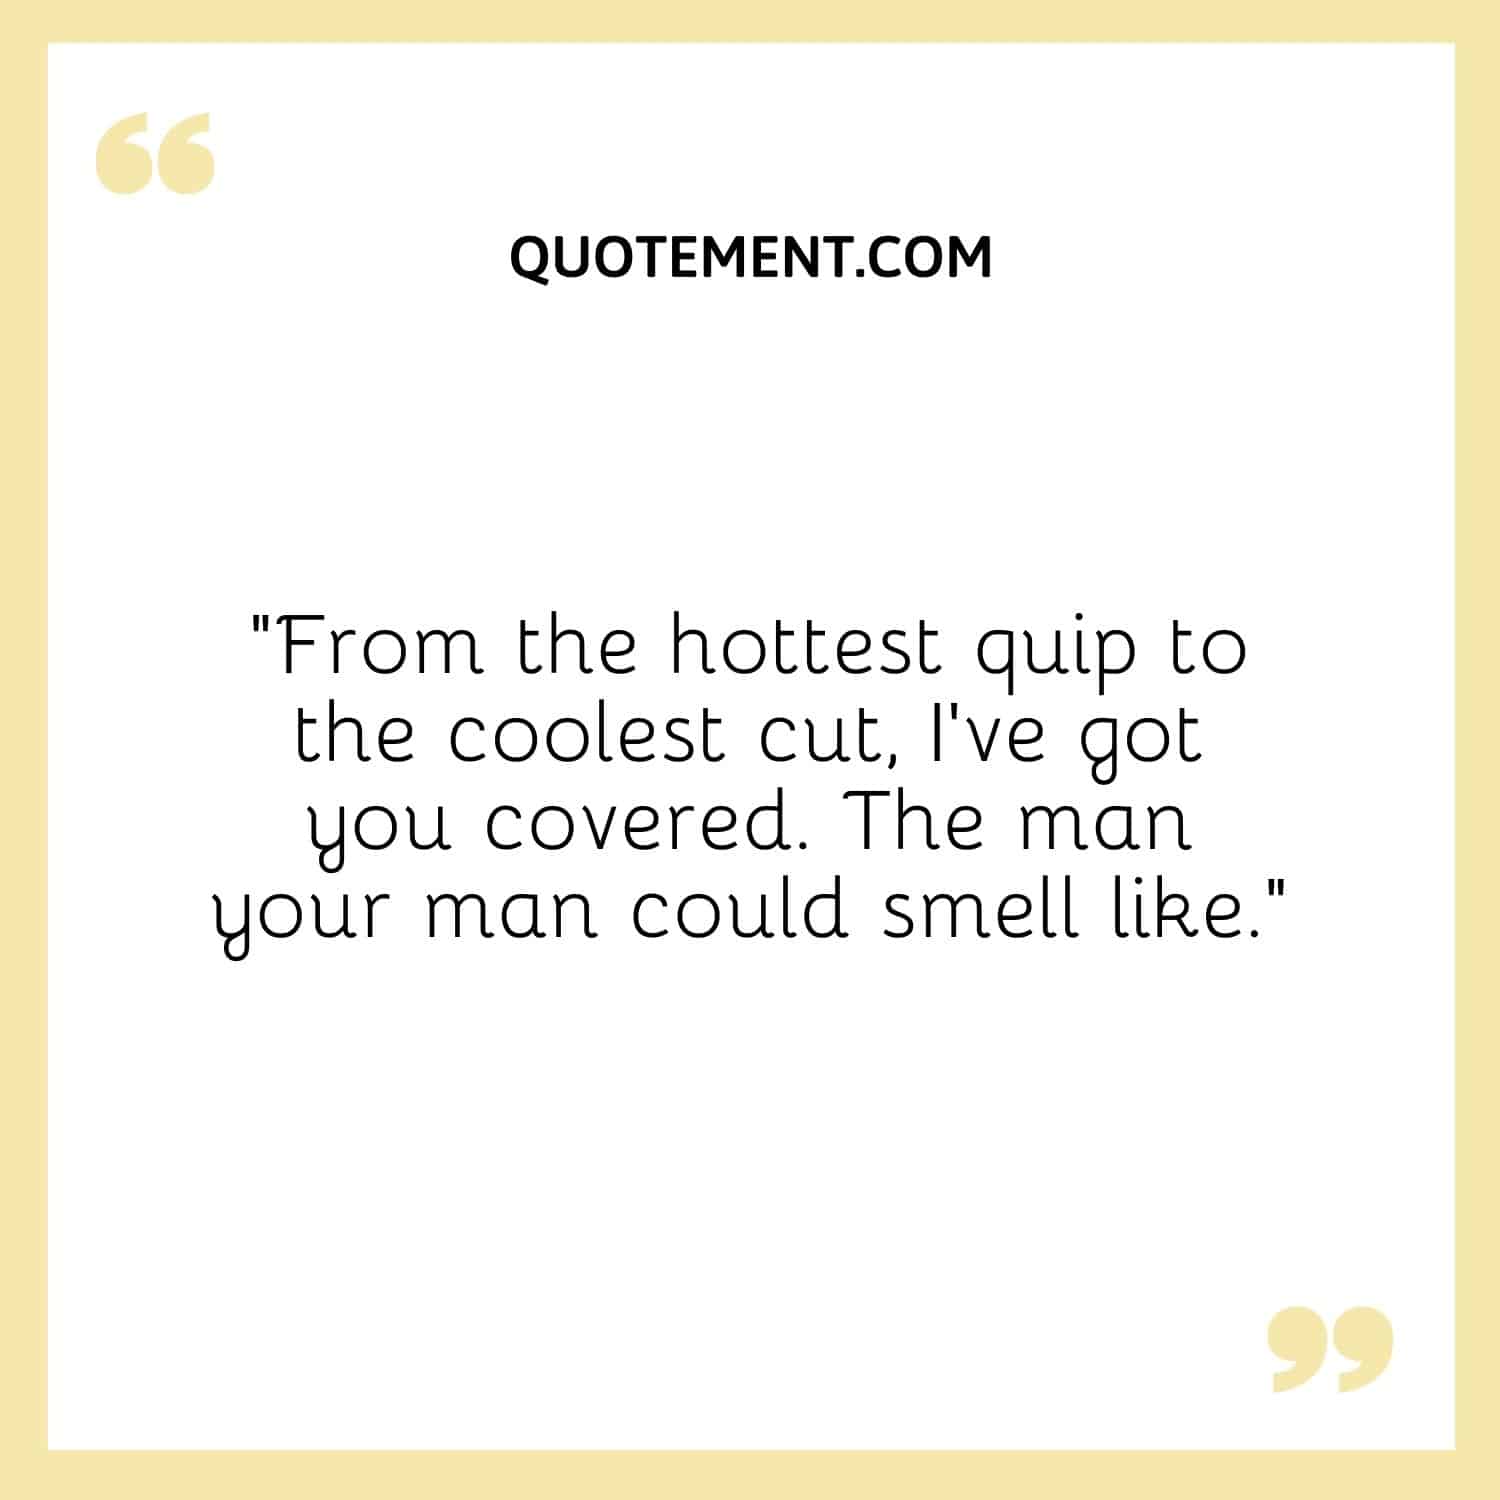 From the hottest quip to the coolest cut, I've got you covered. The man your man could smell like.